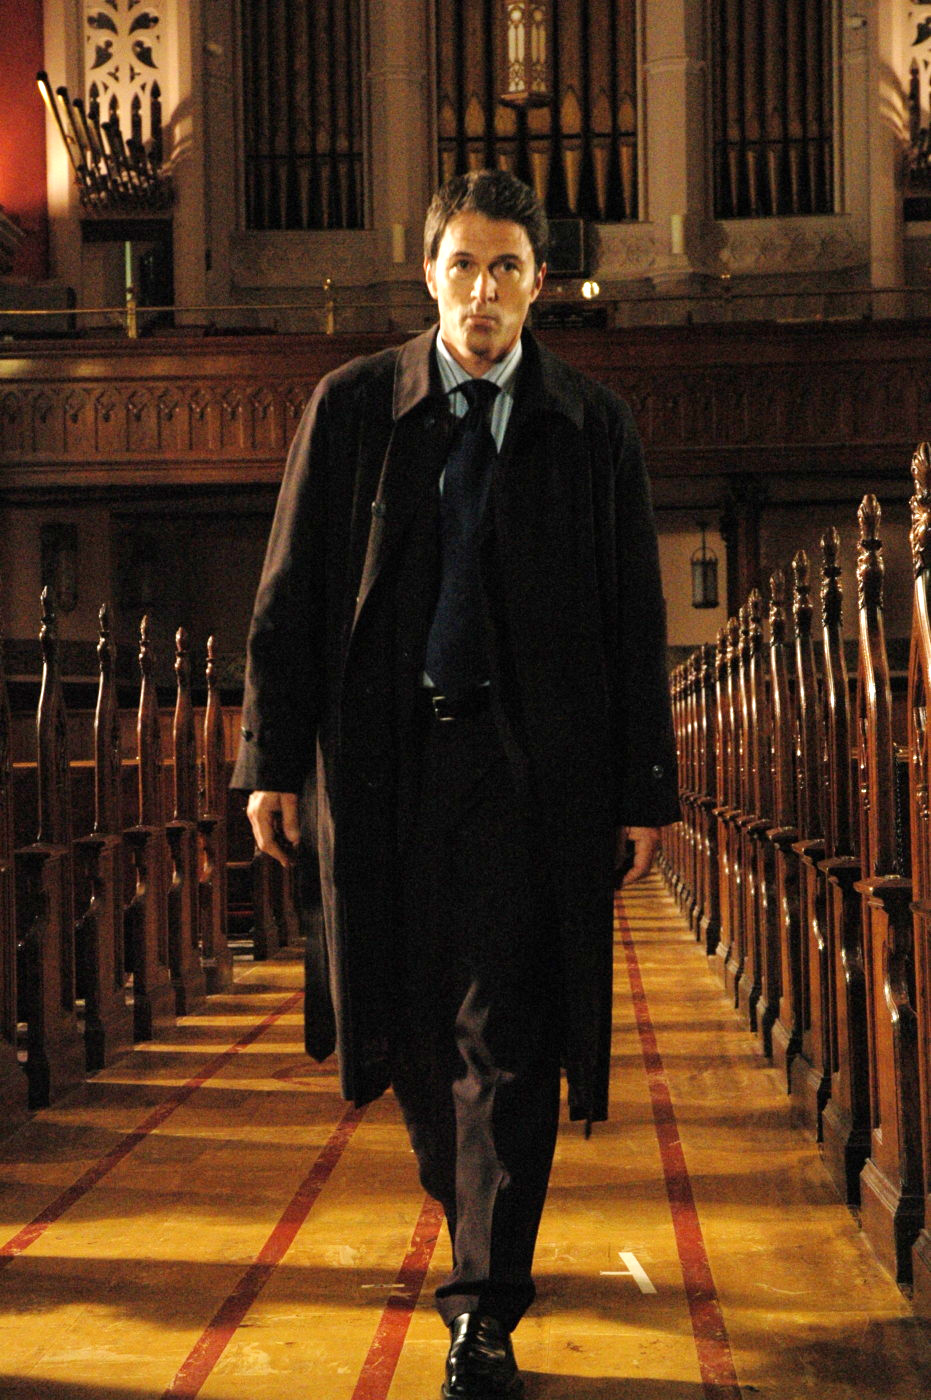 Tim Daly stars as Bryan Becket in IFC Films' The Skeptic (2009)